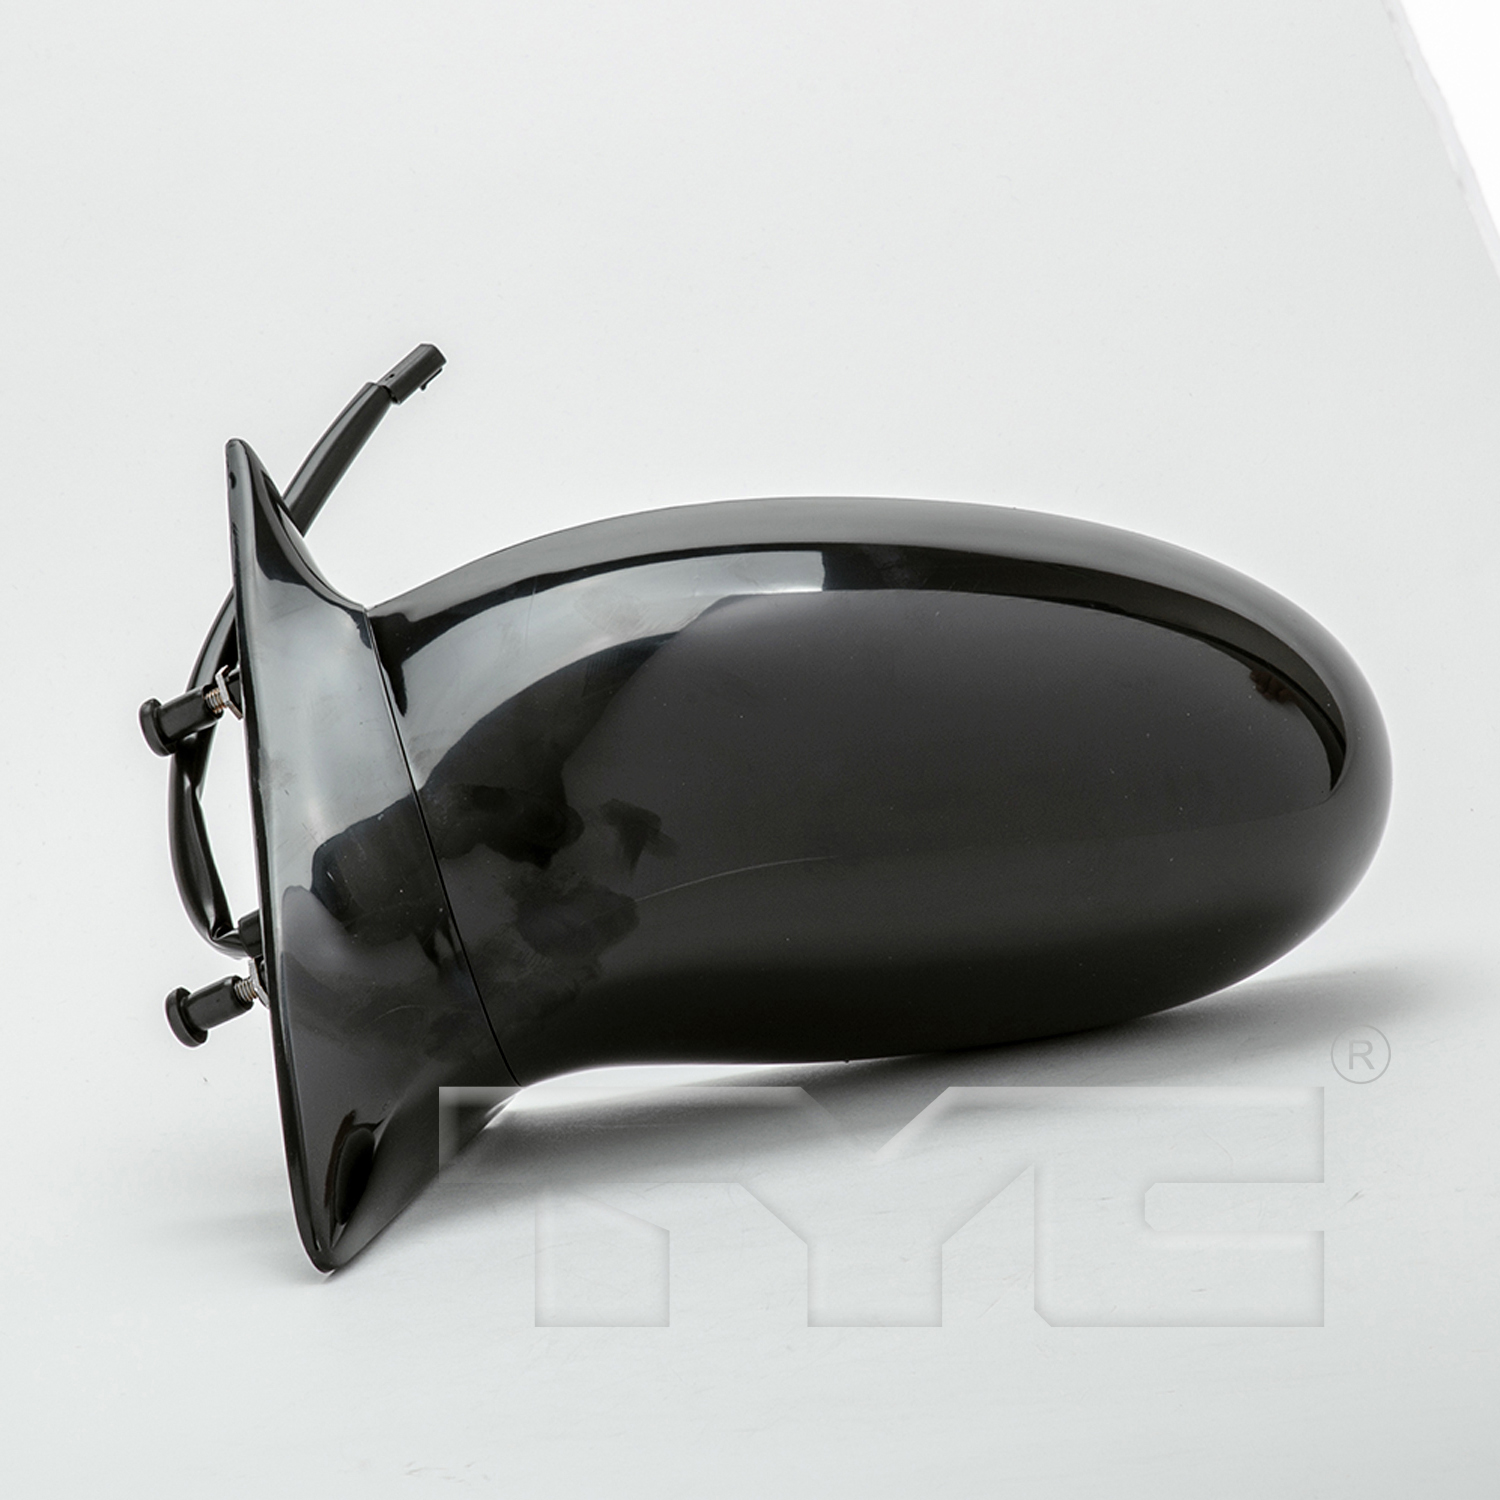 Aftermarket MIRRORS for OLDSMOBILE - ALERO, ALERO,99-03,LT Mirror outside rear view